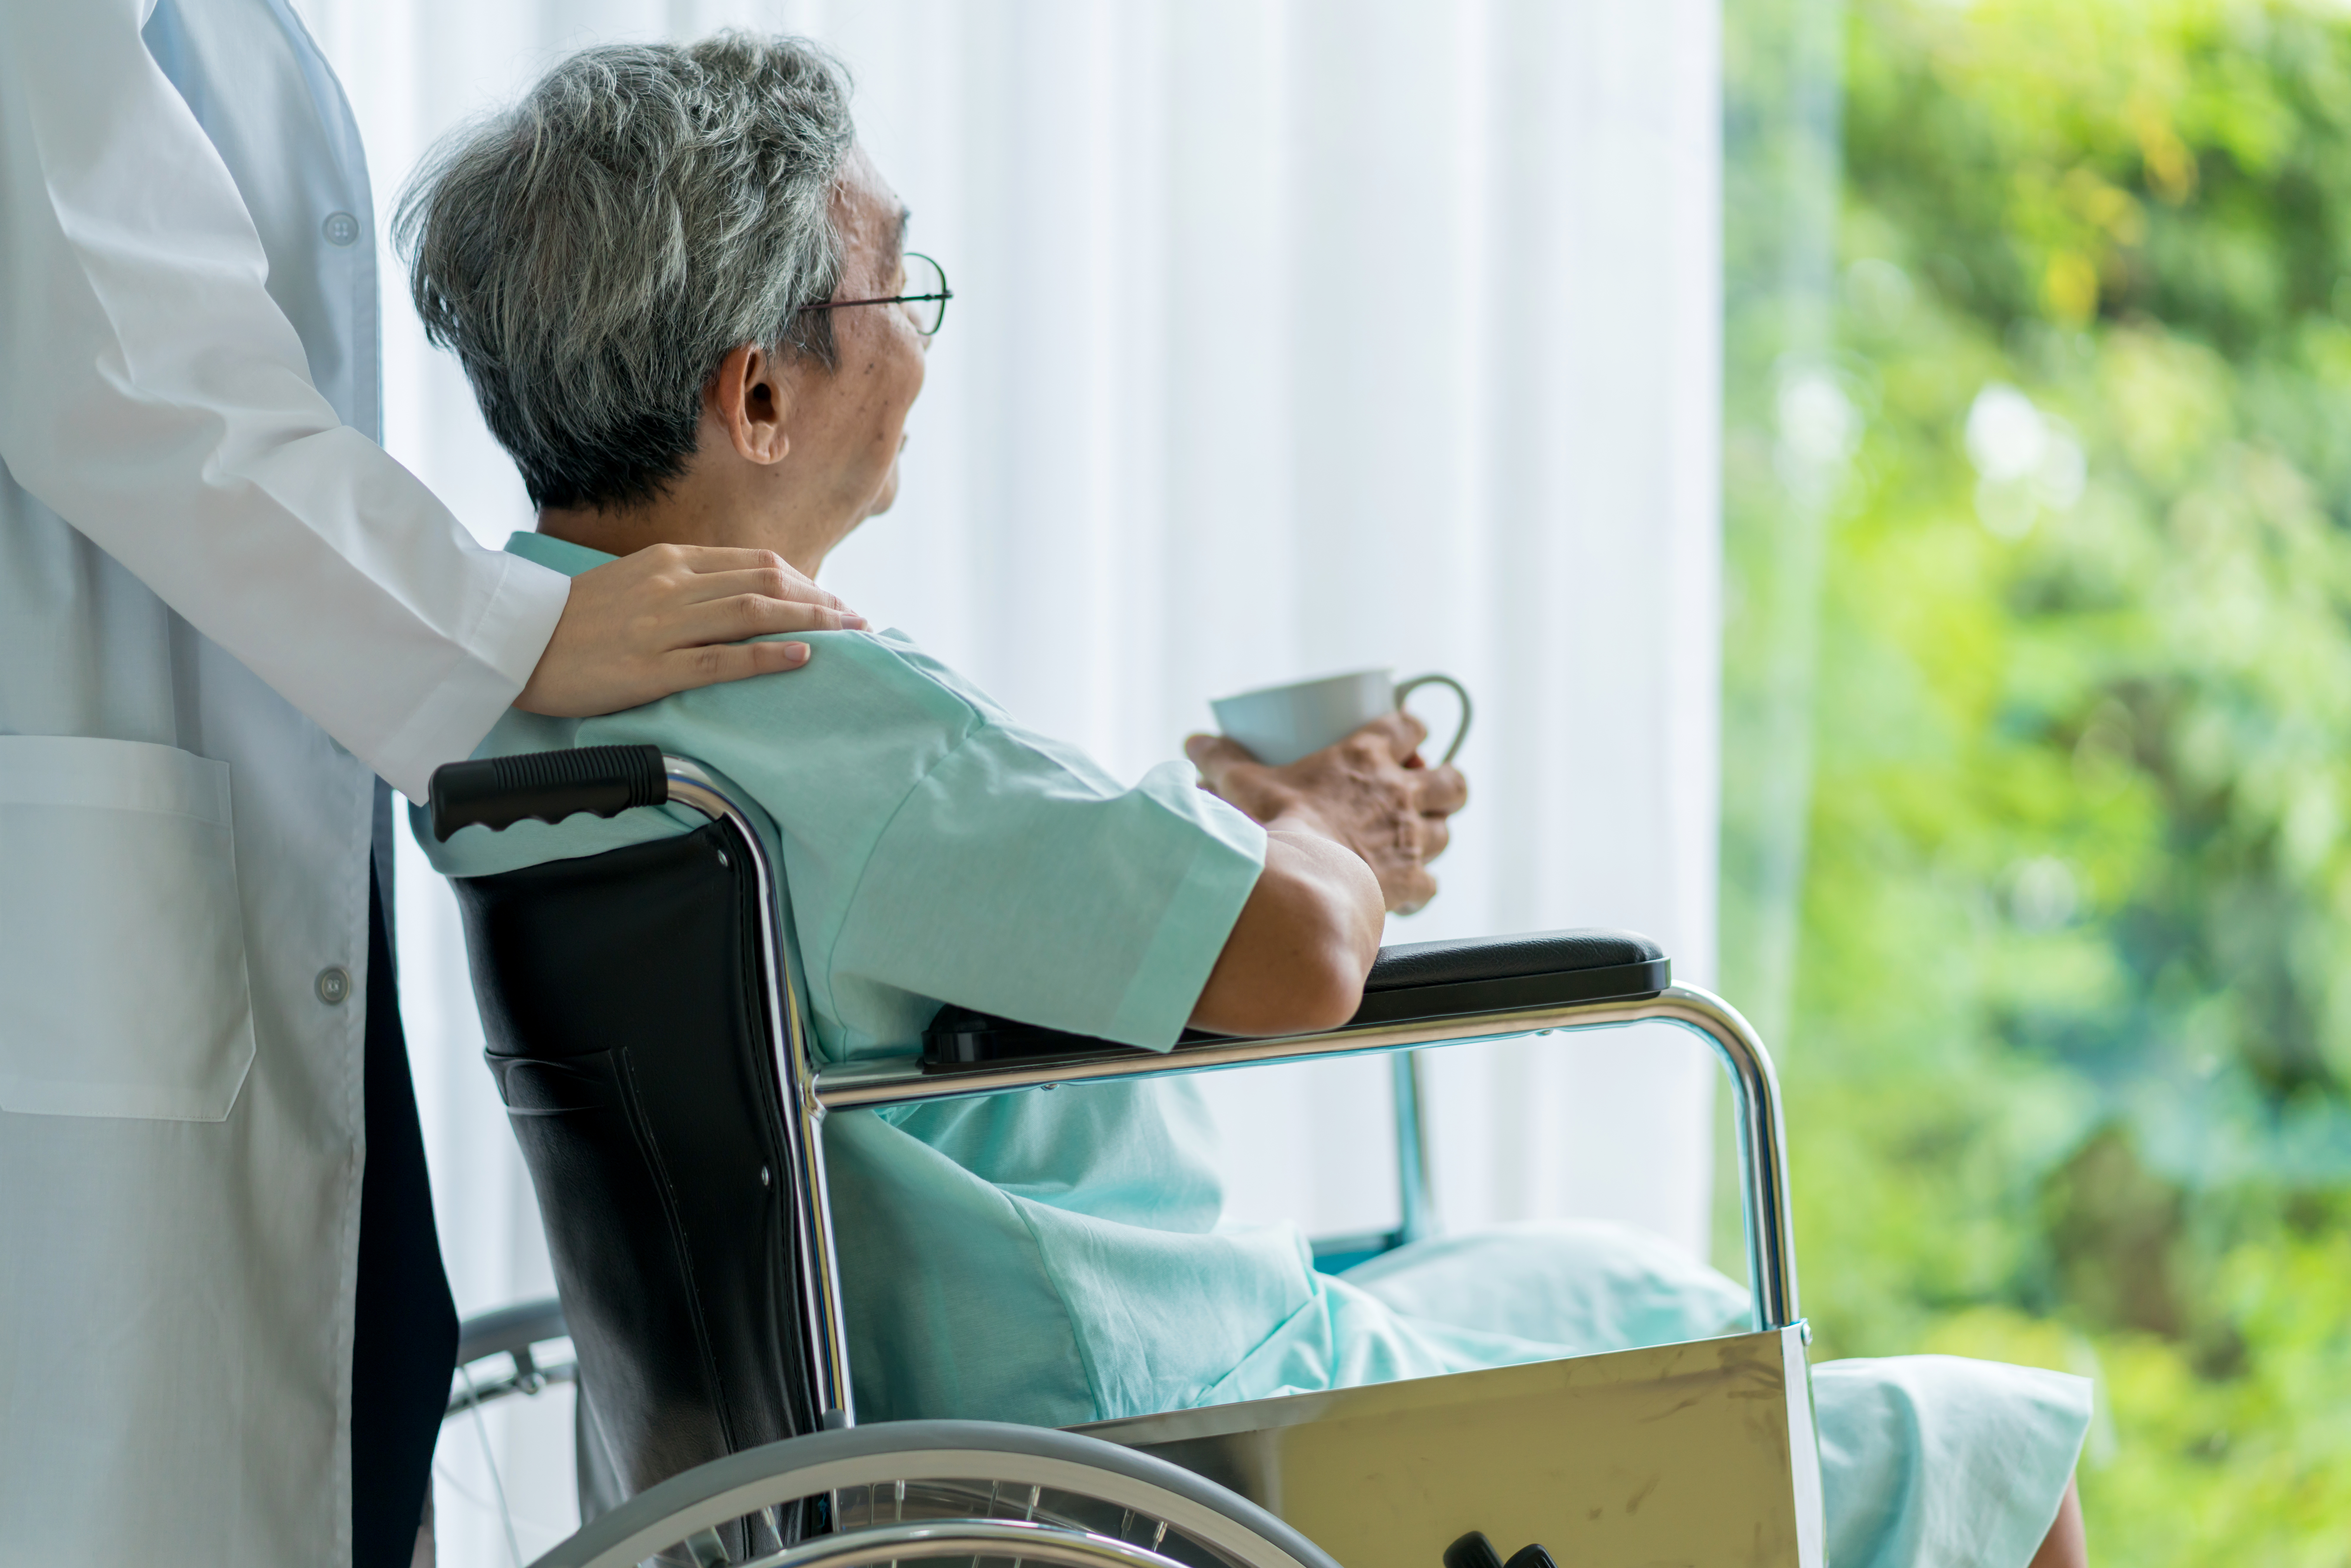 Brain Health Initiative aims to protect older surgery patients from cognitive risks